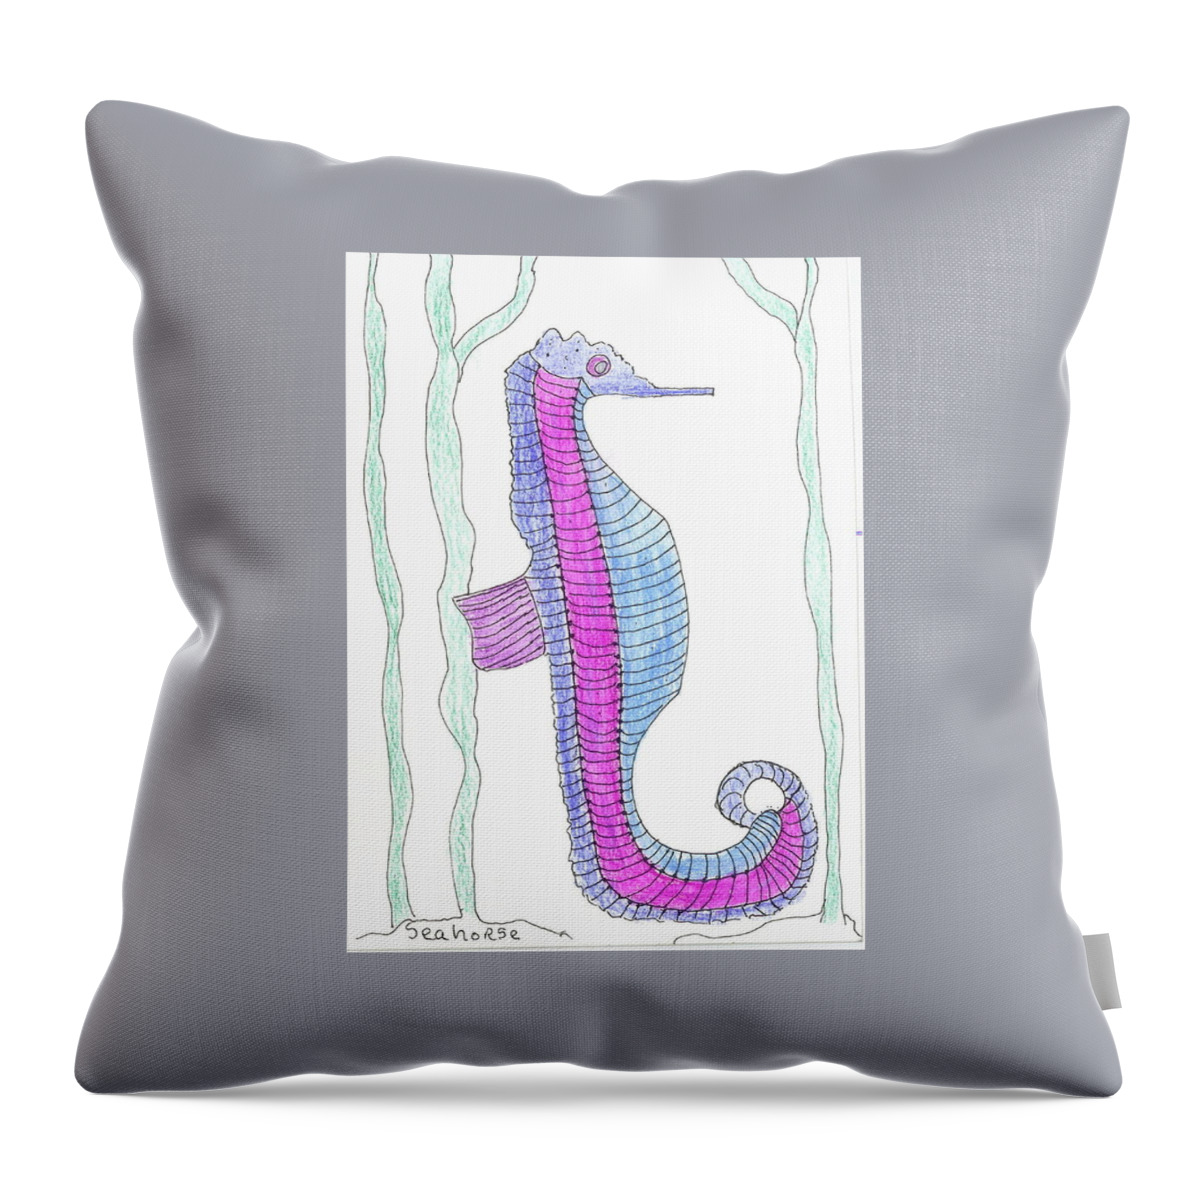 Sea Horse Throw Pillow featuring the painting Sea Horse by Helen Holden-Gladsky